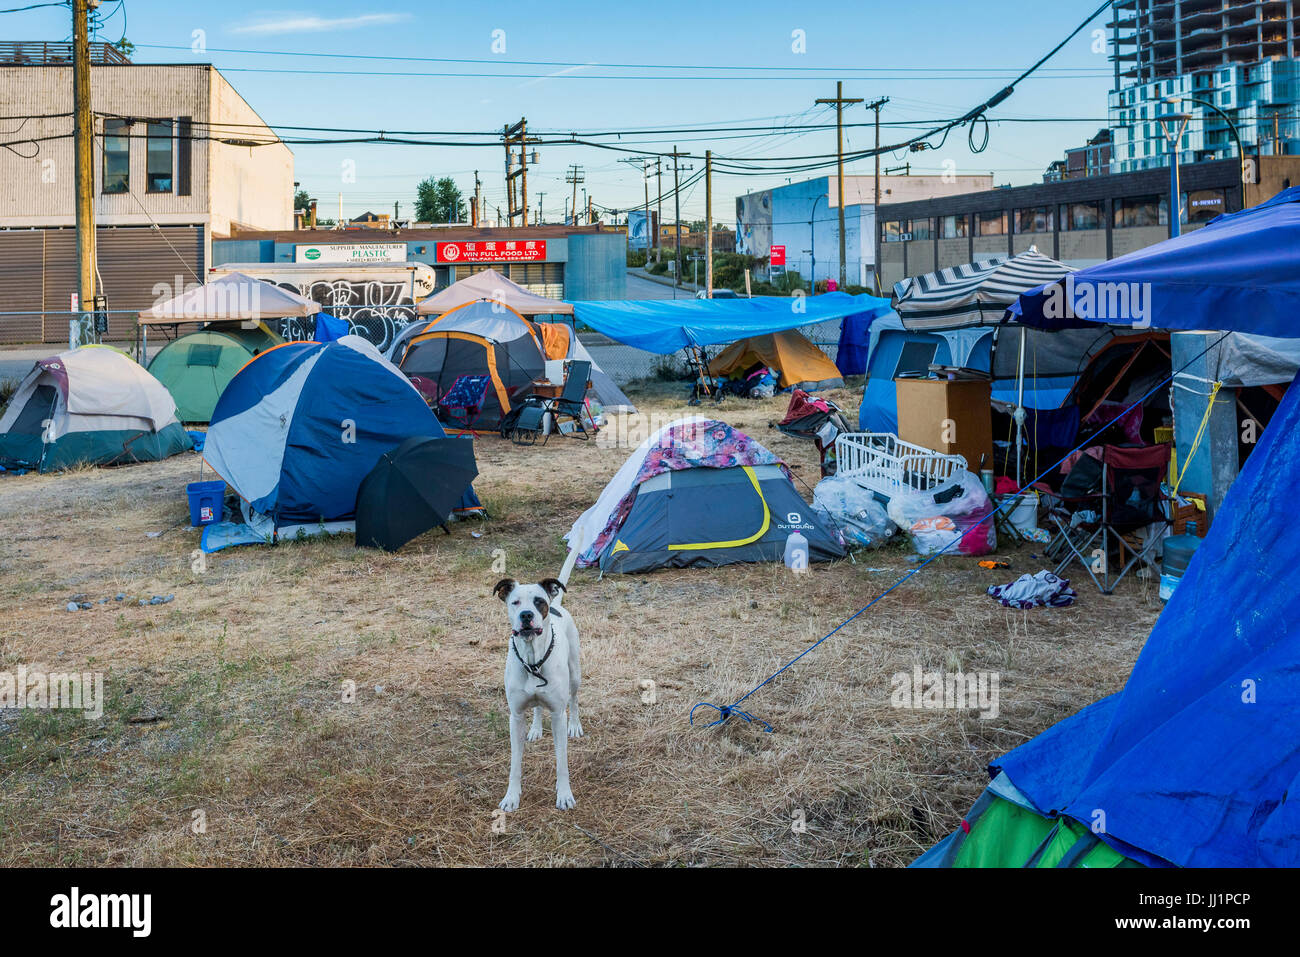 Sugar Mountain Tent City Homeless Camp, DTES, Vancouver, British Columbia, Canada. Stock Photo